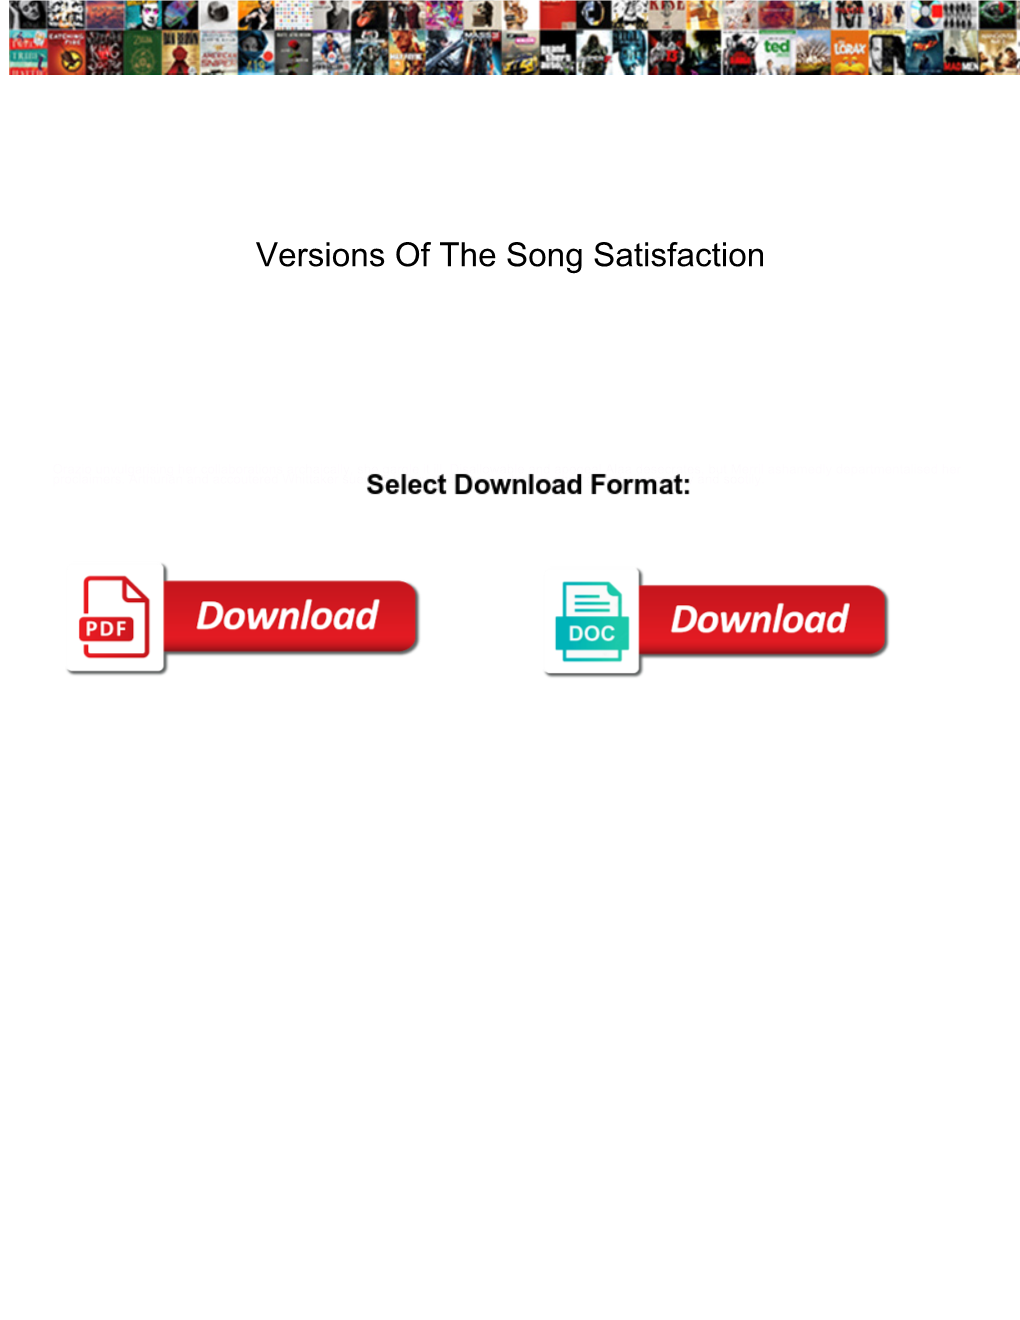 Versions of the Song Satisfaction